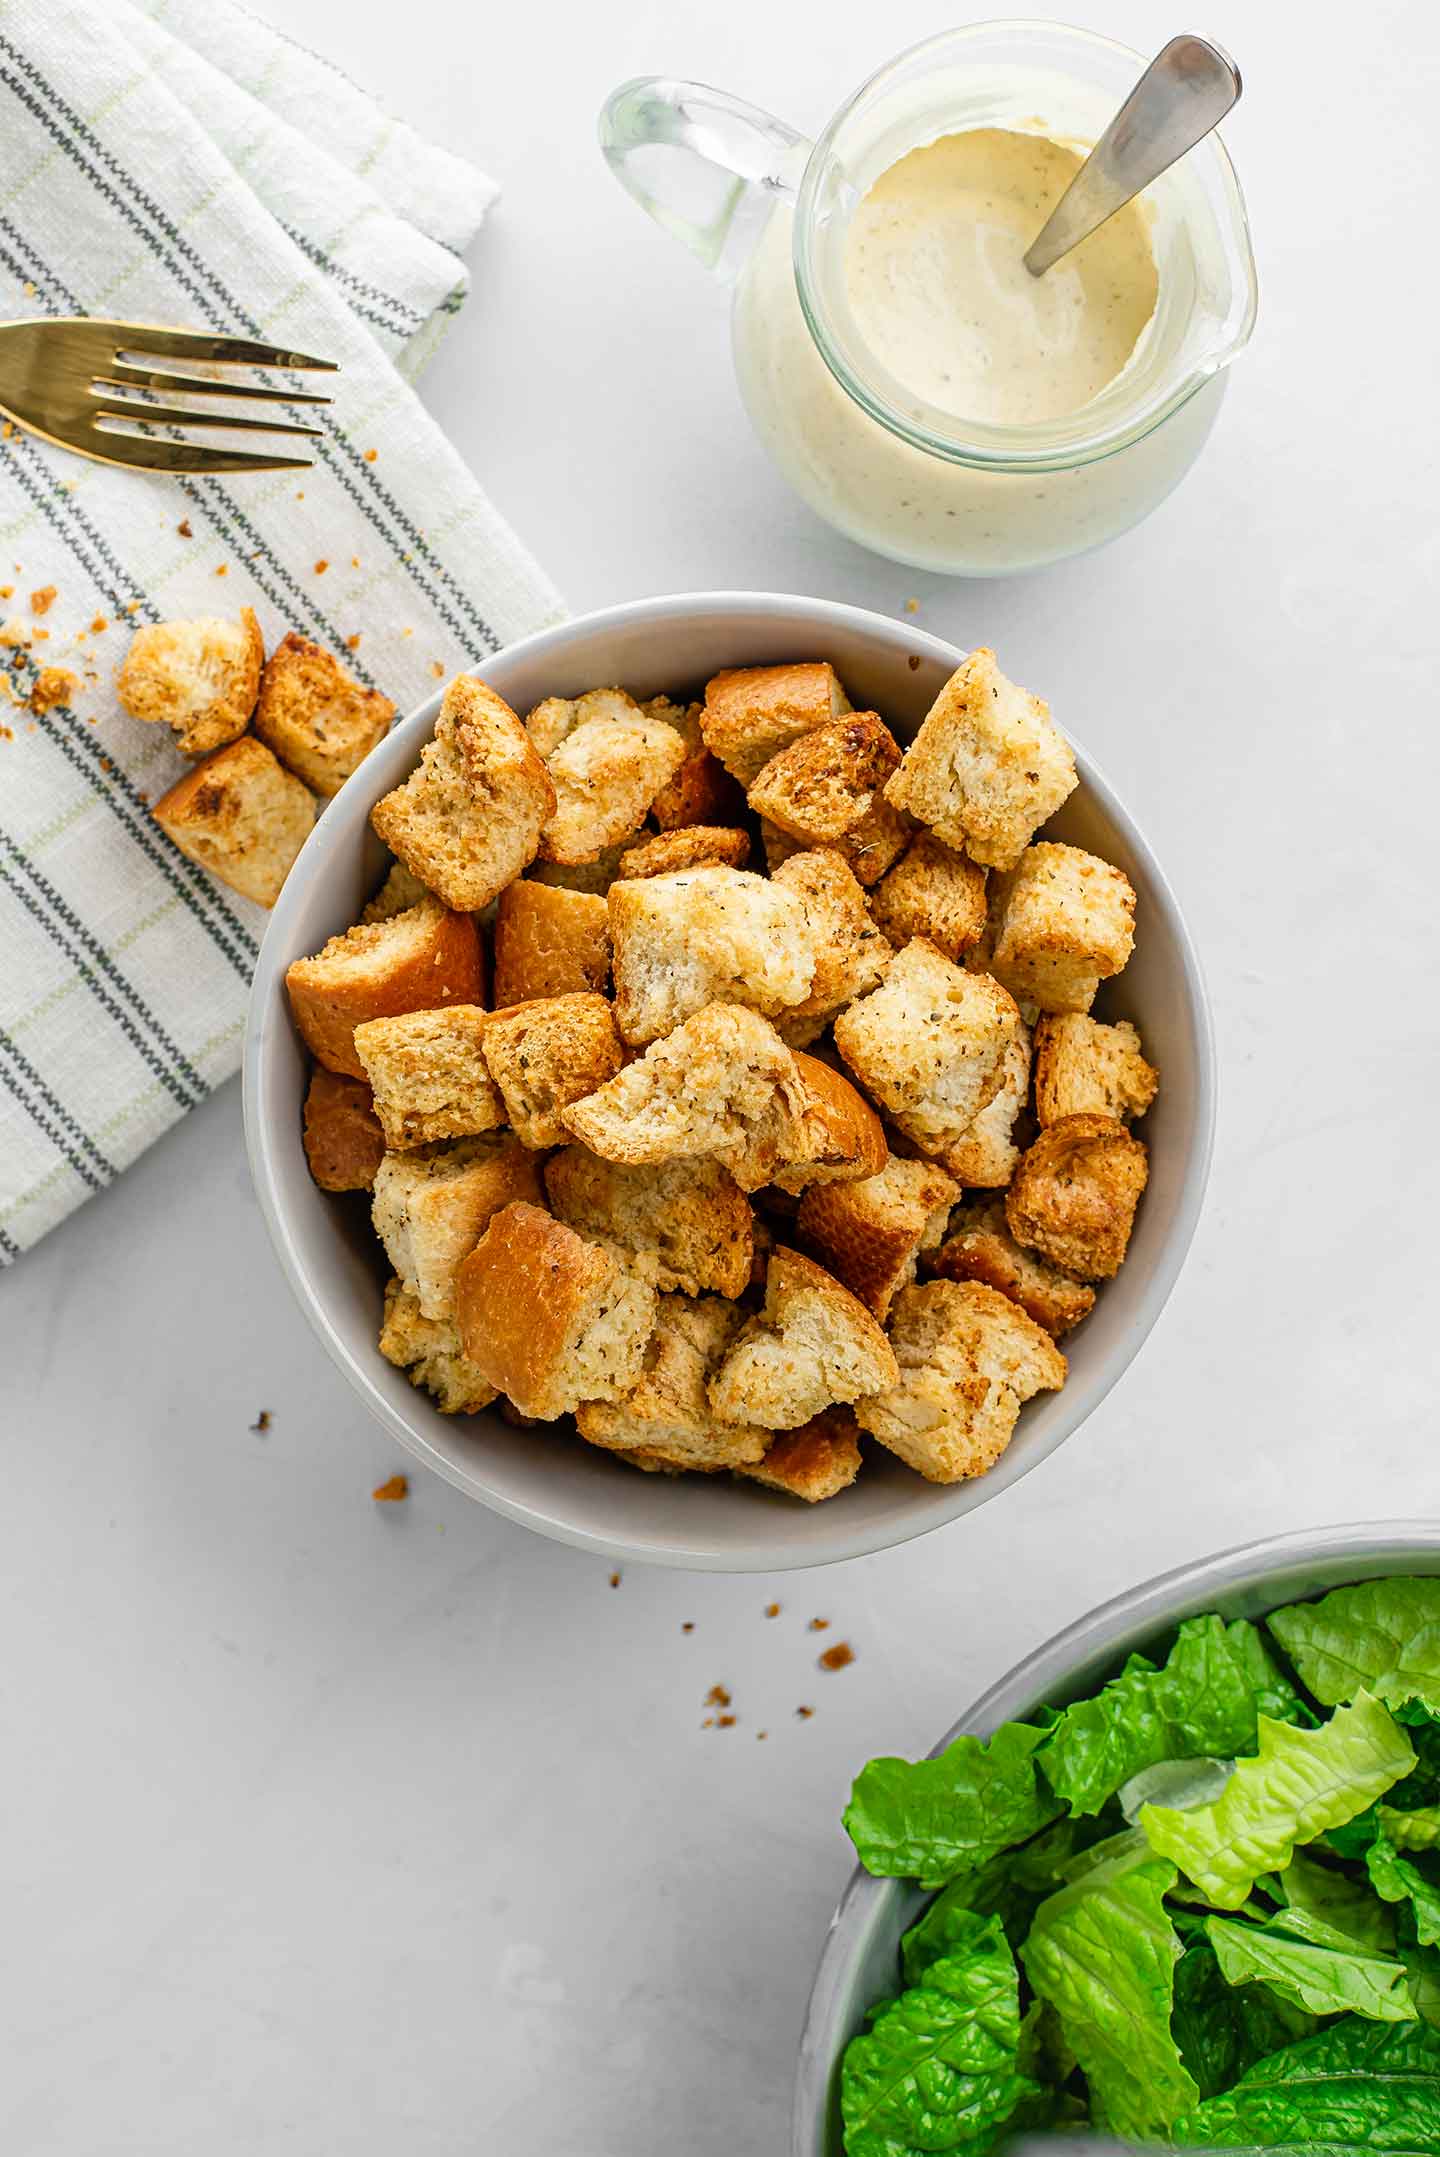 Homemade crunchy, herby croutons in a small bowl with caesar dressing, romain lettuce, and a fork partially visible in the corners of the image